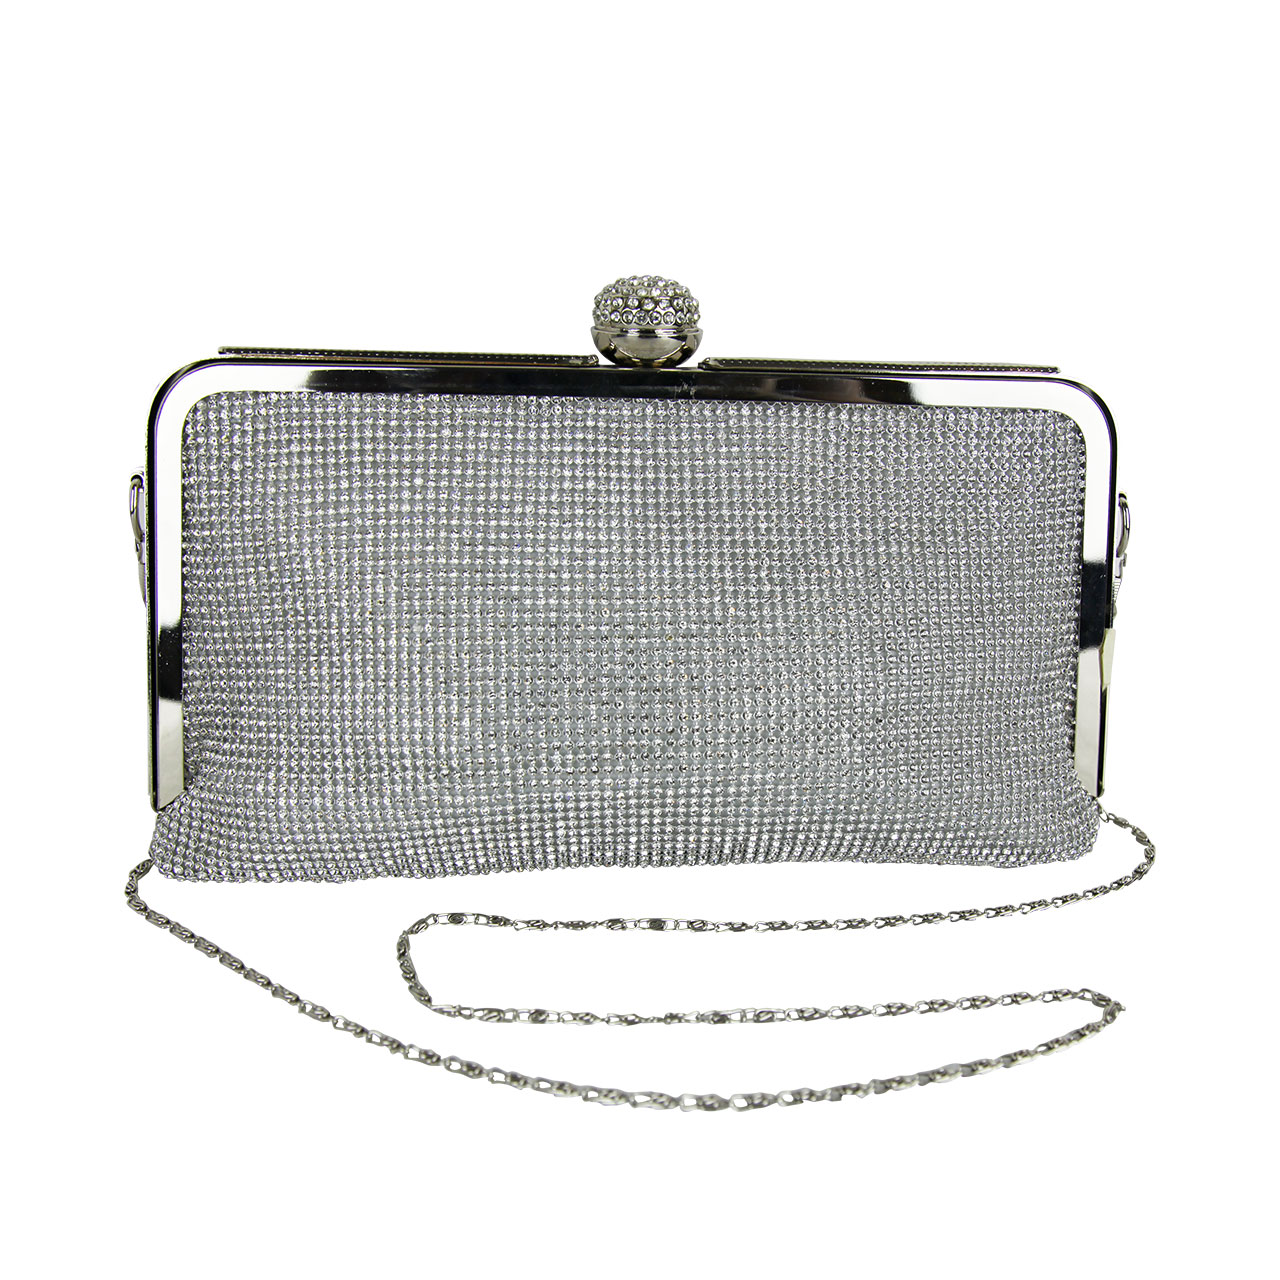 Buy Sparkly Silver Purse Clutch Glitter Bag With Chain USA